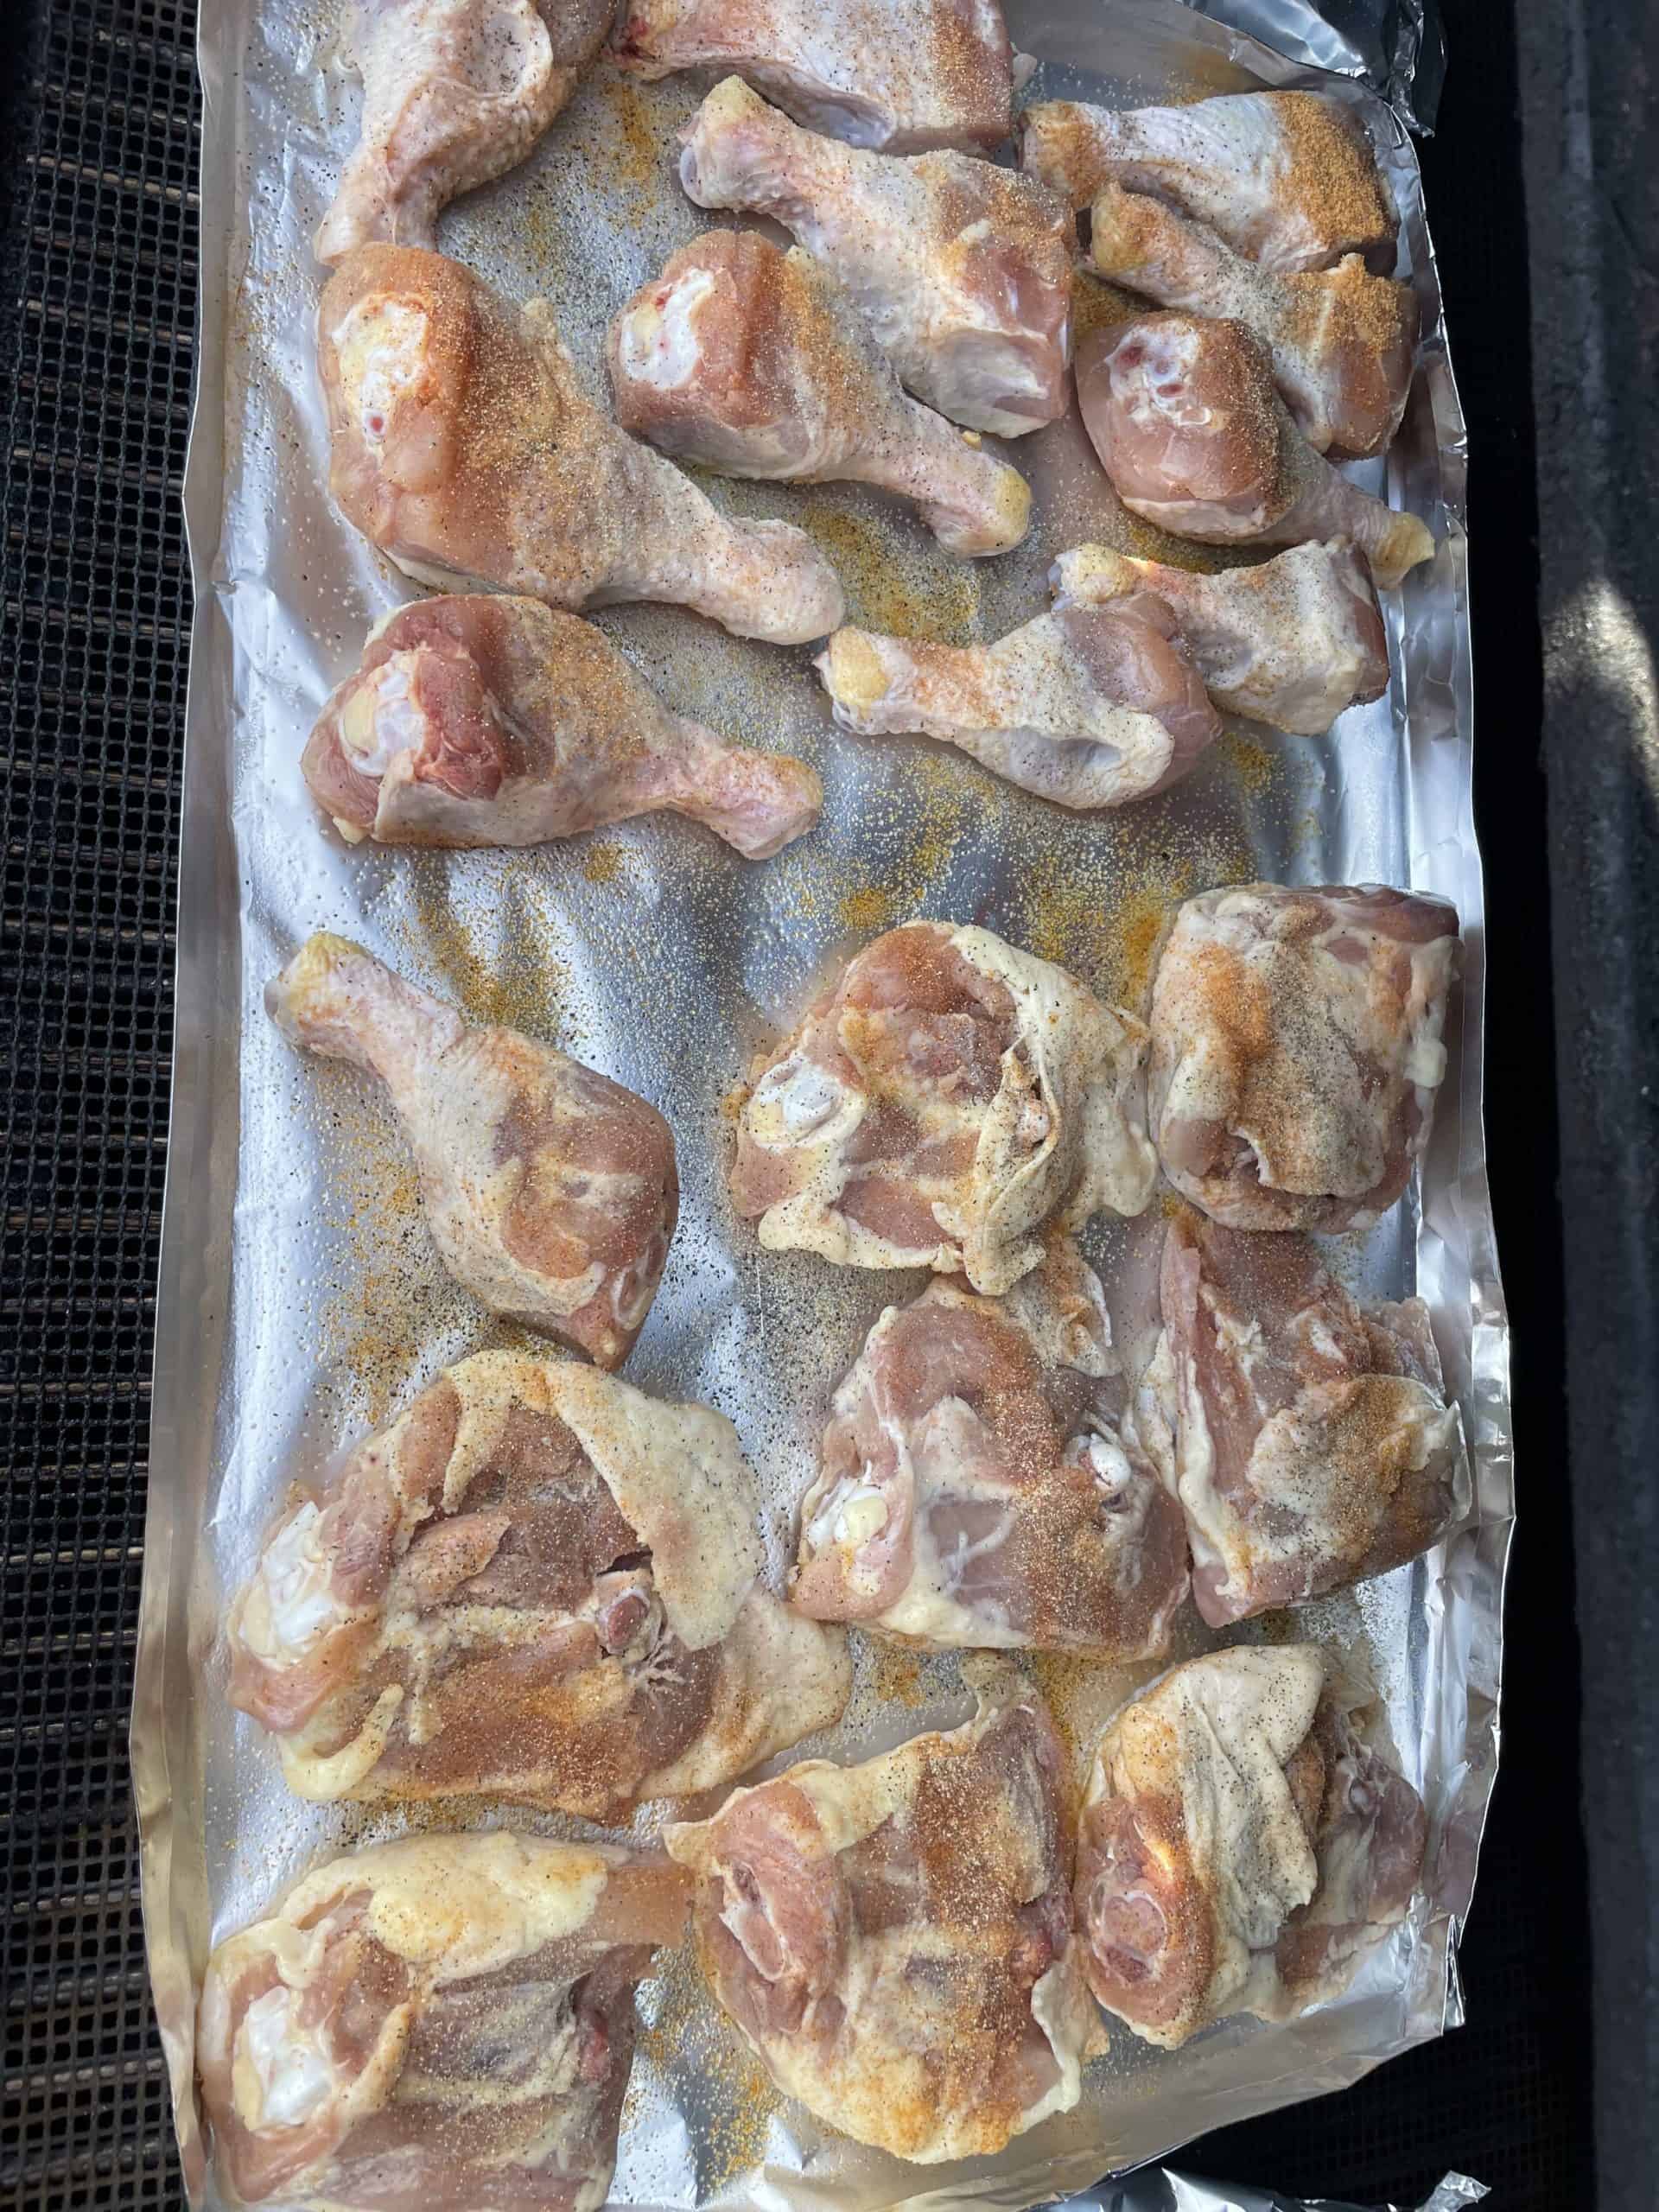 Place seasoned chicken pieces onto greased foil skin side down while on the pellet smoker grill.